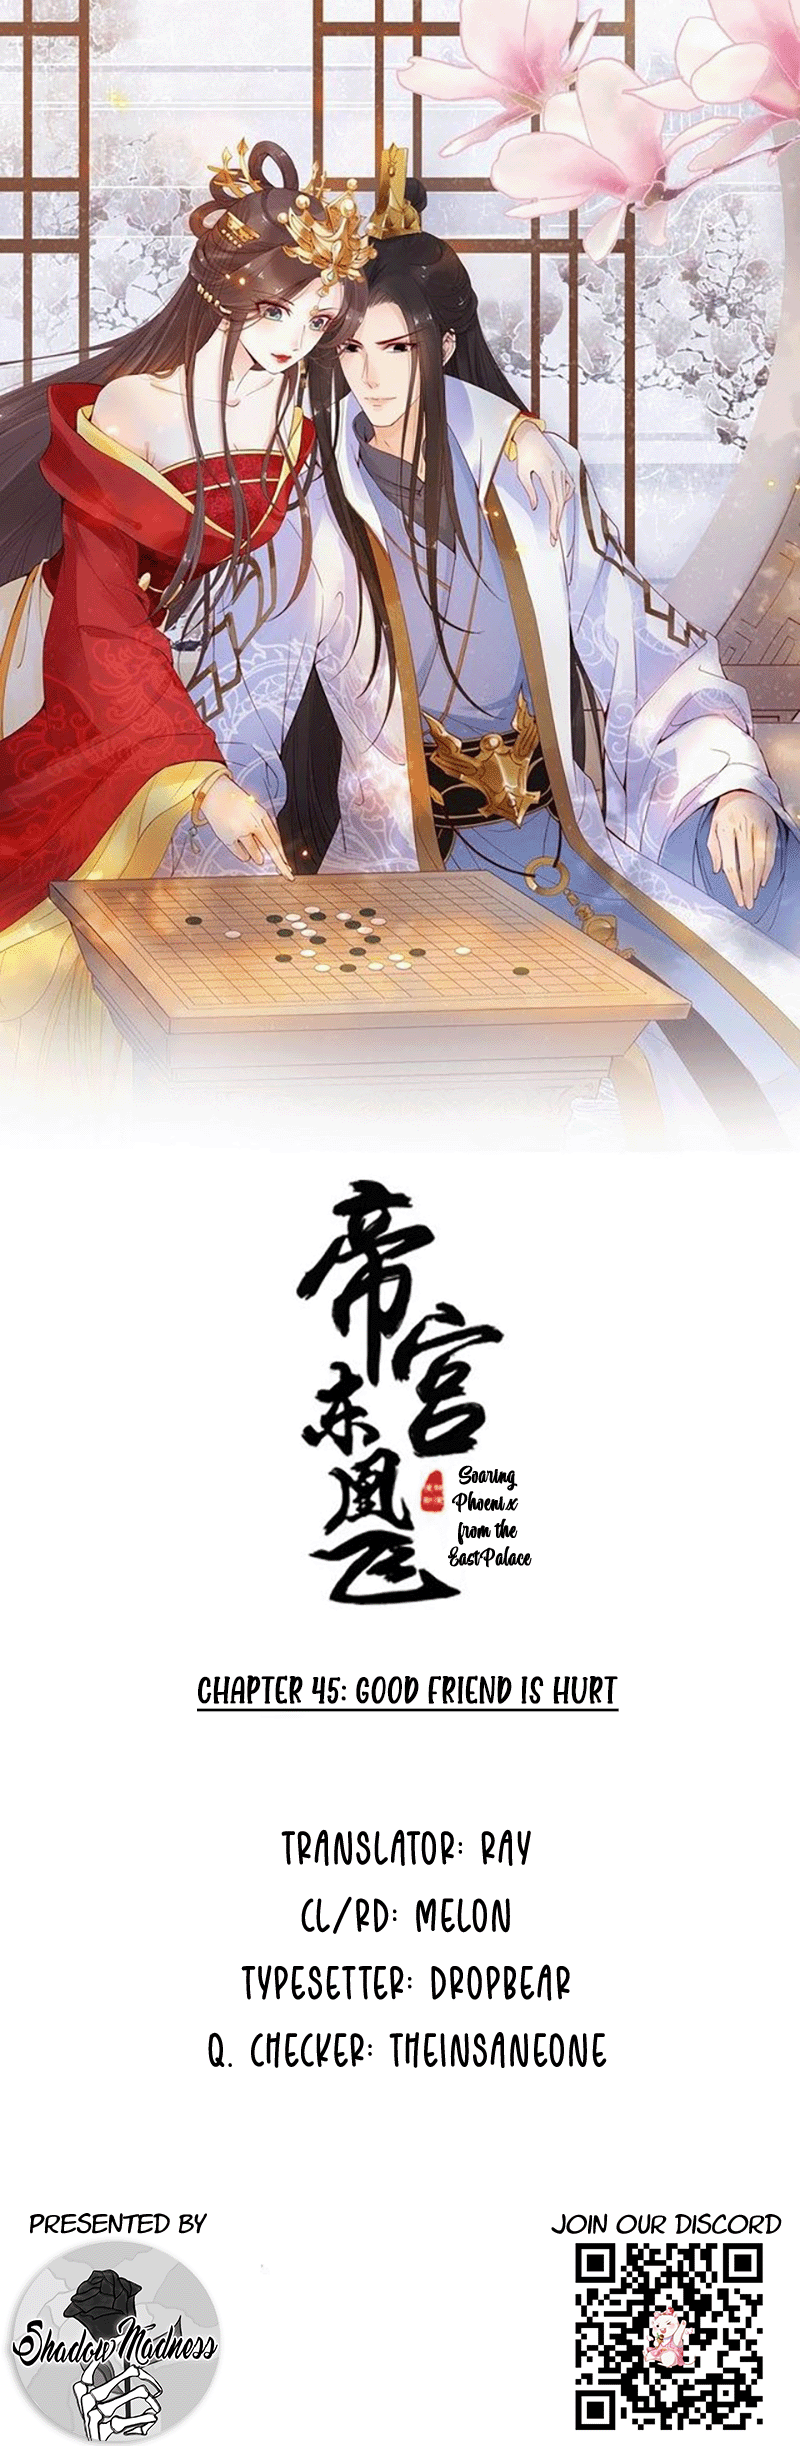 Soaring Phoenix From The East Palace Chapter 45: Good Friend Is Hurt - Picture 1